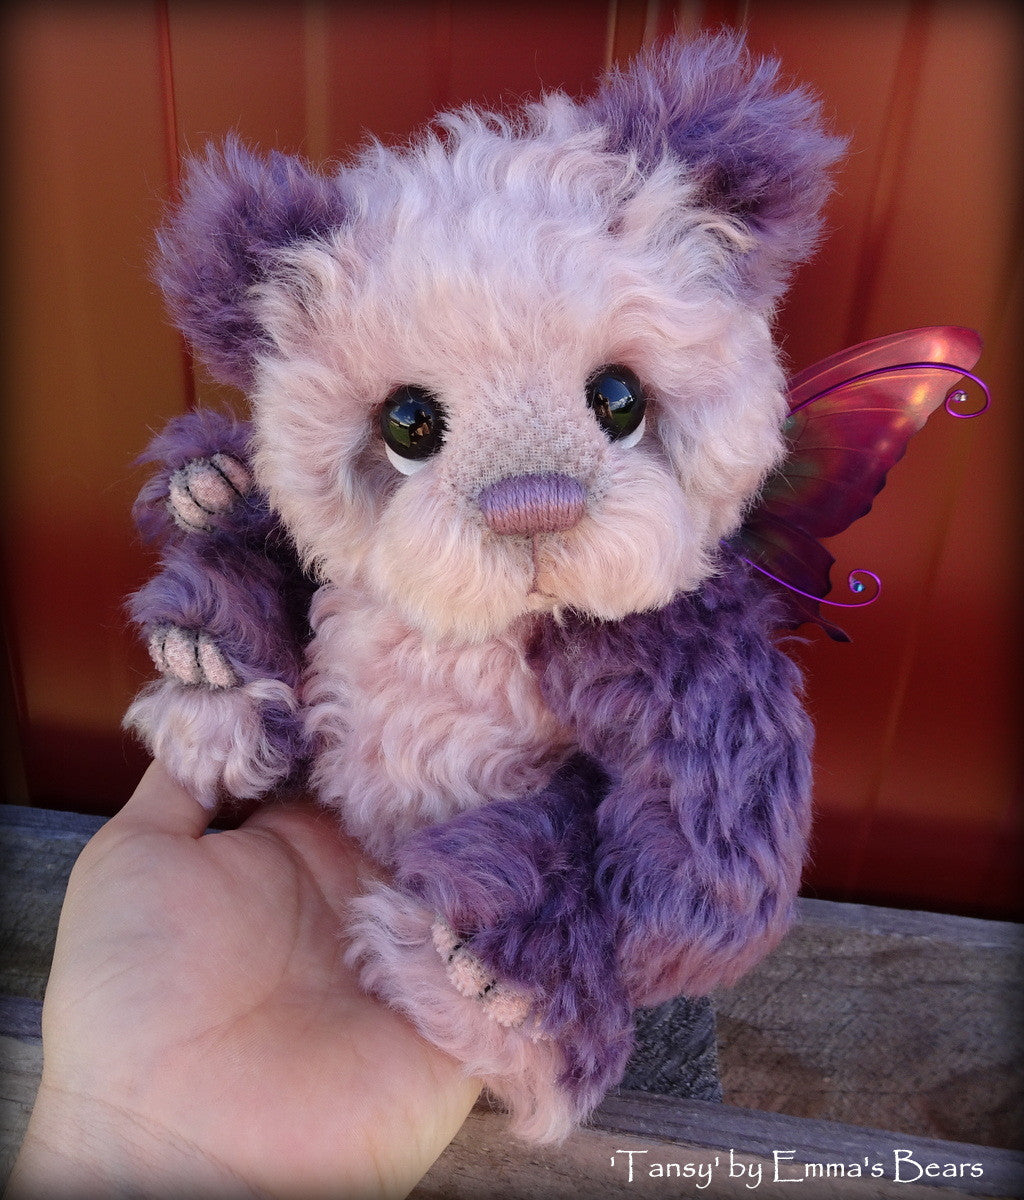 Tansy - 9IN hand dyed kid mohair bear by Emmas Bears - OOAK